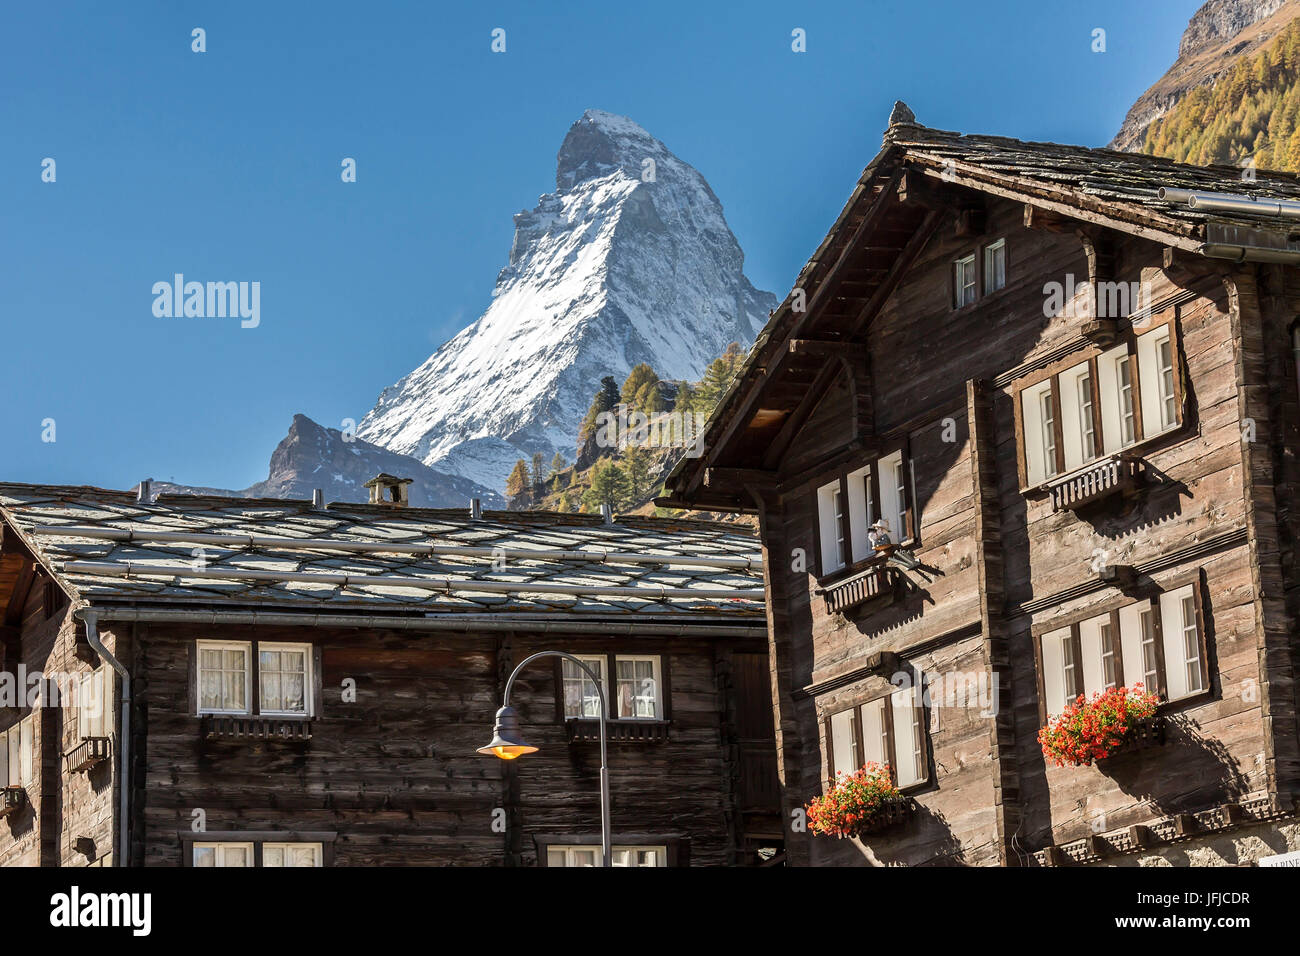 Traditional houses in the village of Zermatt with Matterhorn in the background, Valais, Switzerland Europe Stock Photo